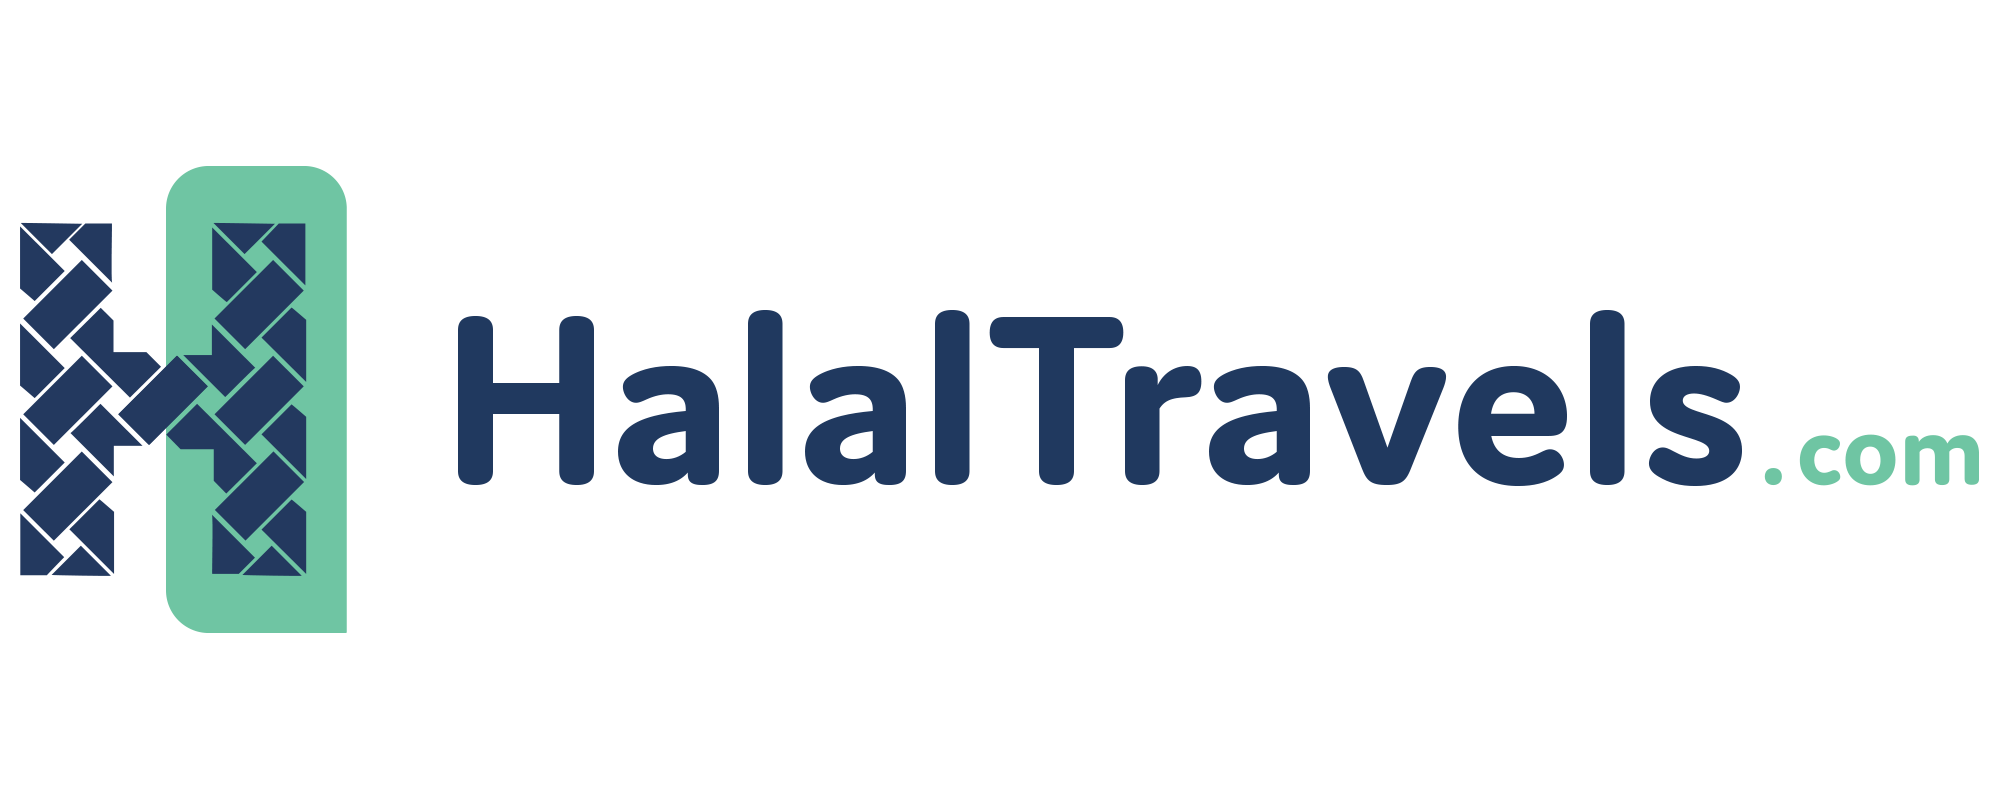 HalalTravels.com: A New Player in the Travel Industry